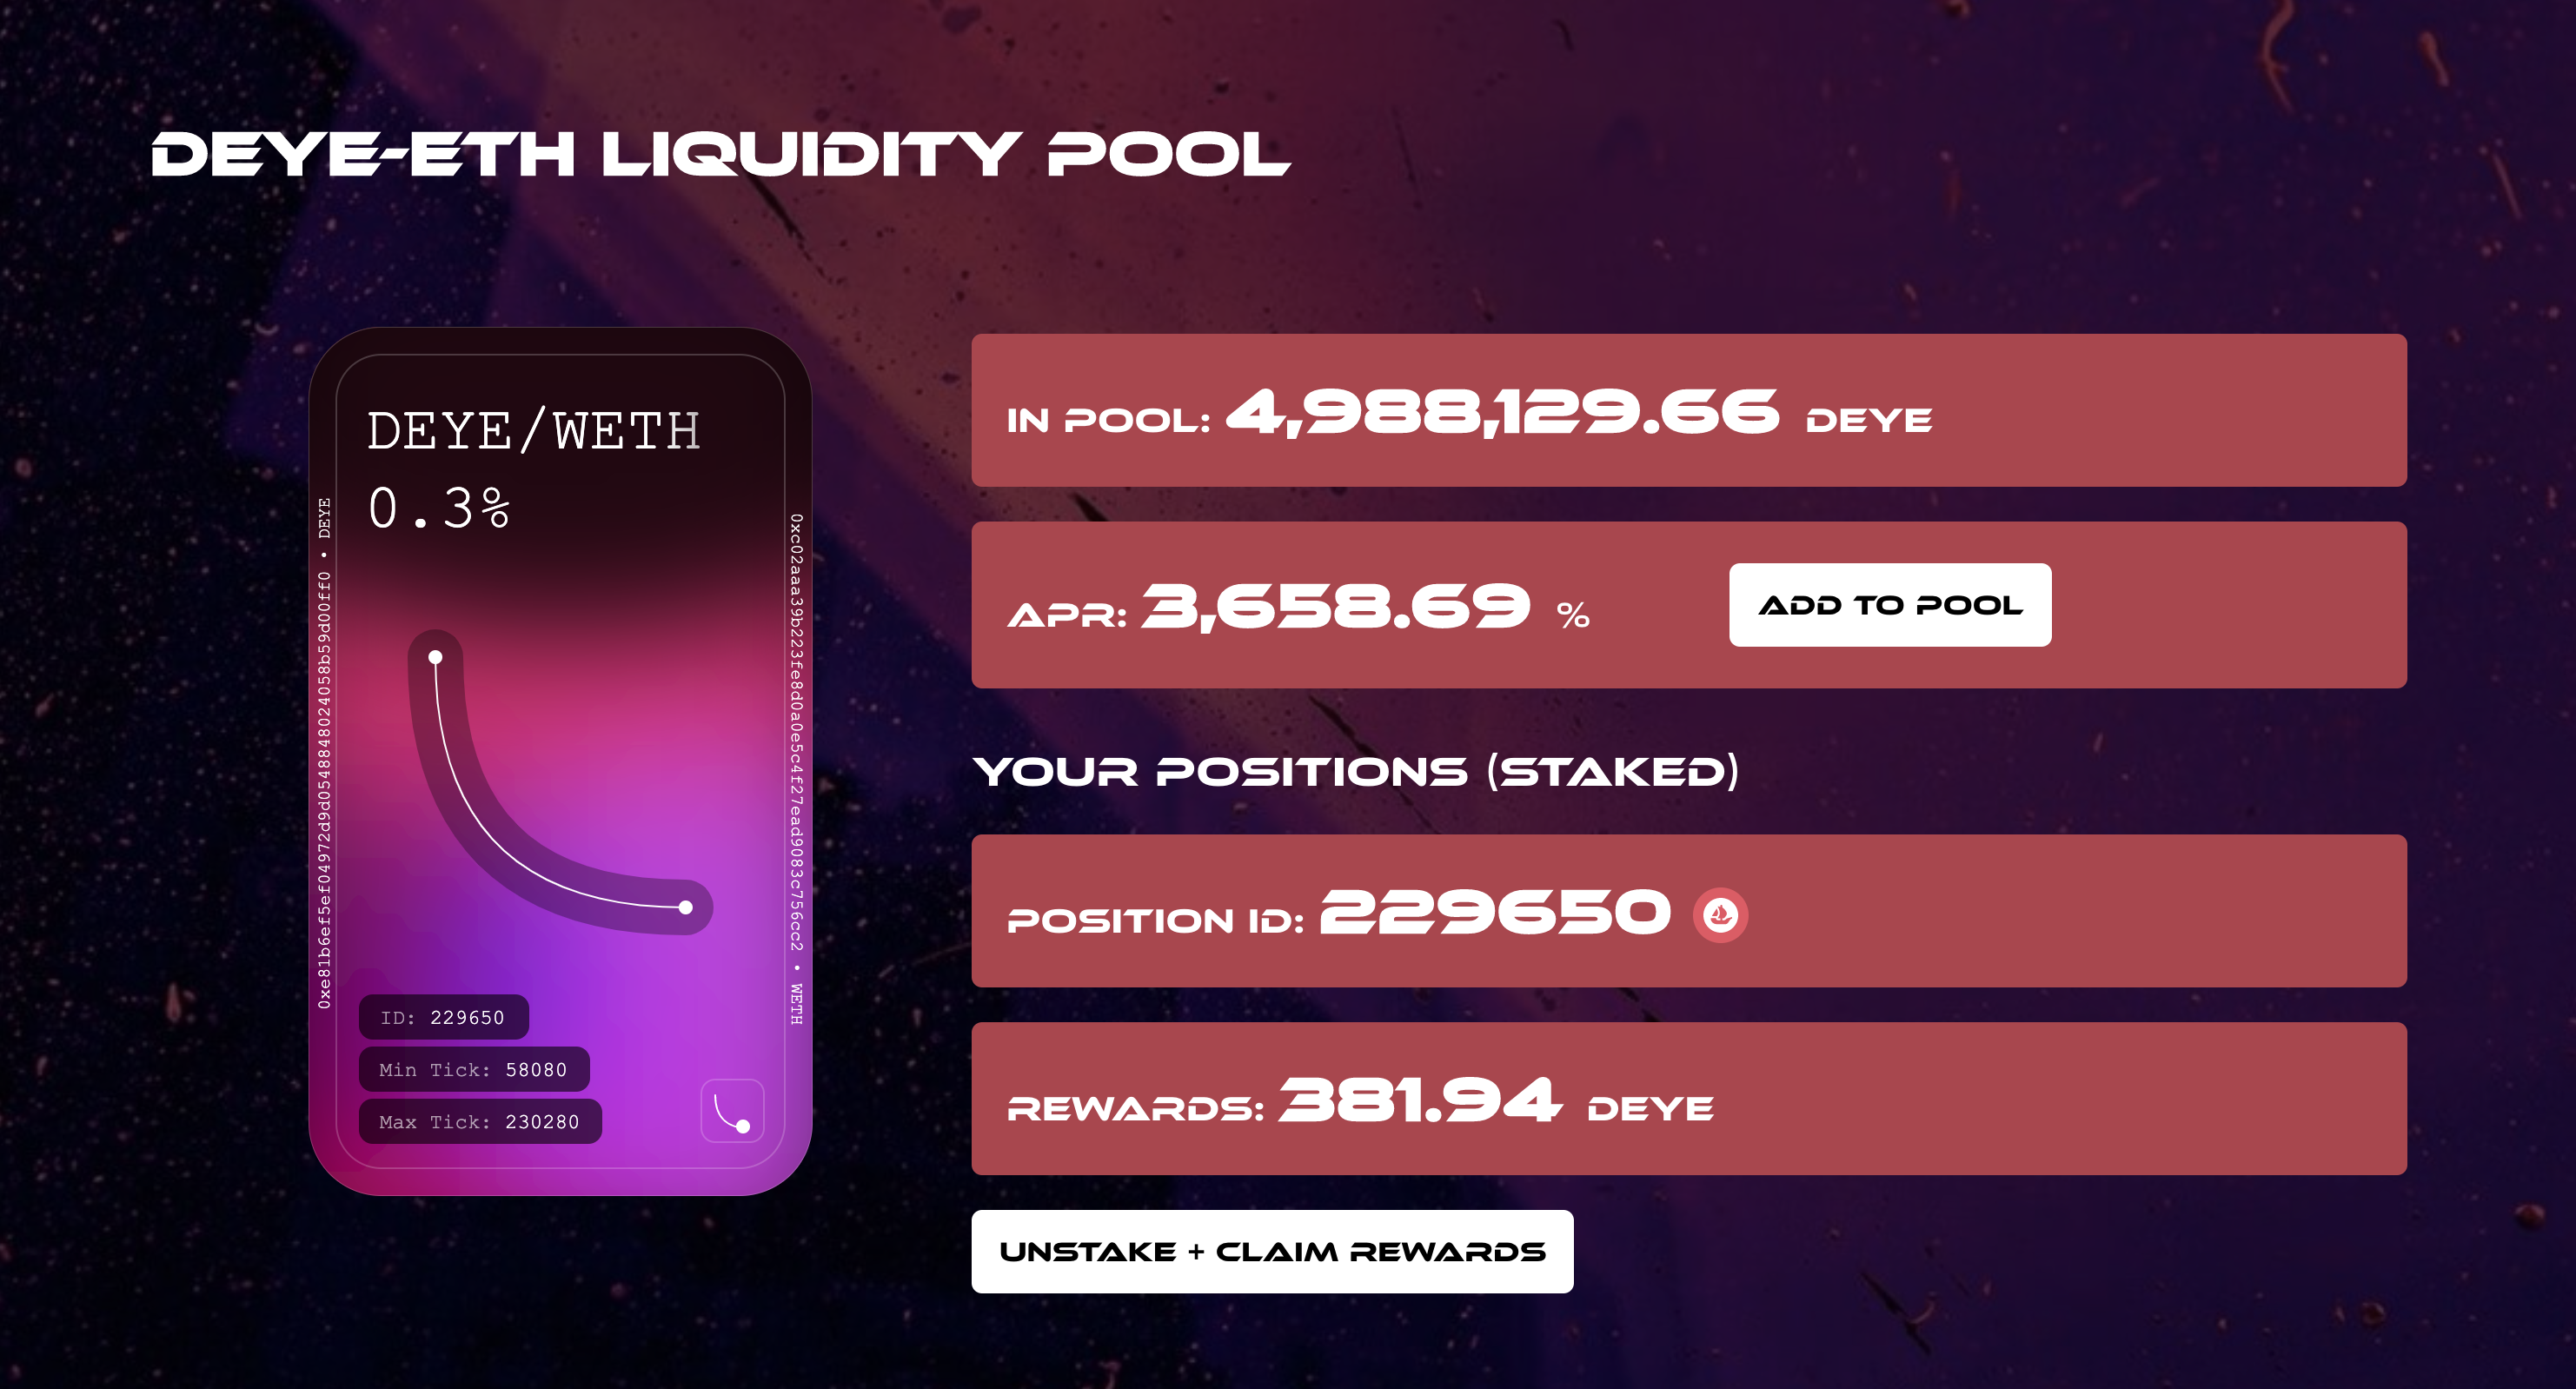 Staked liquidity tokens and the rewards received so far